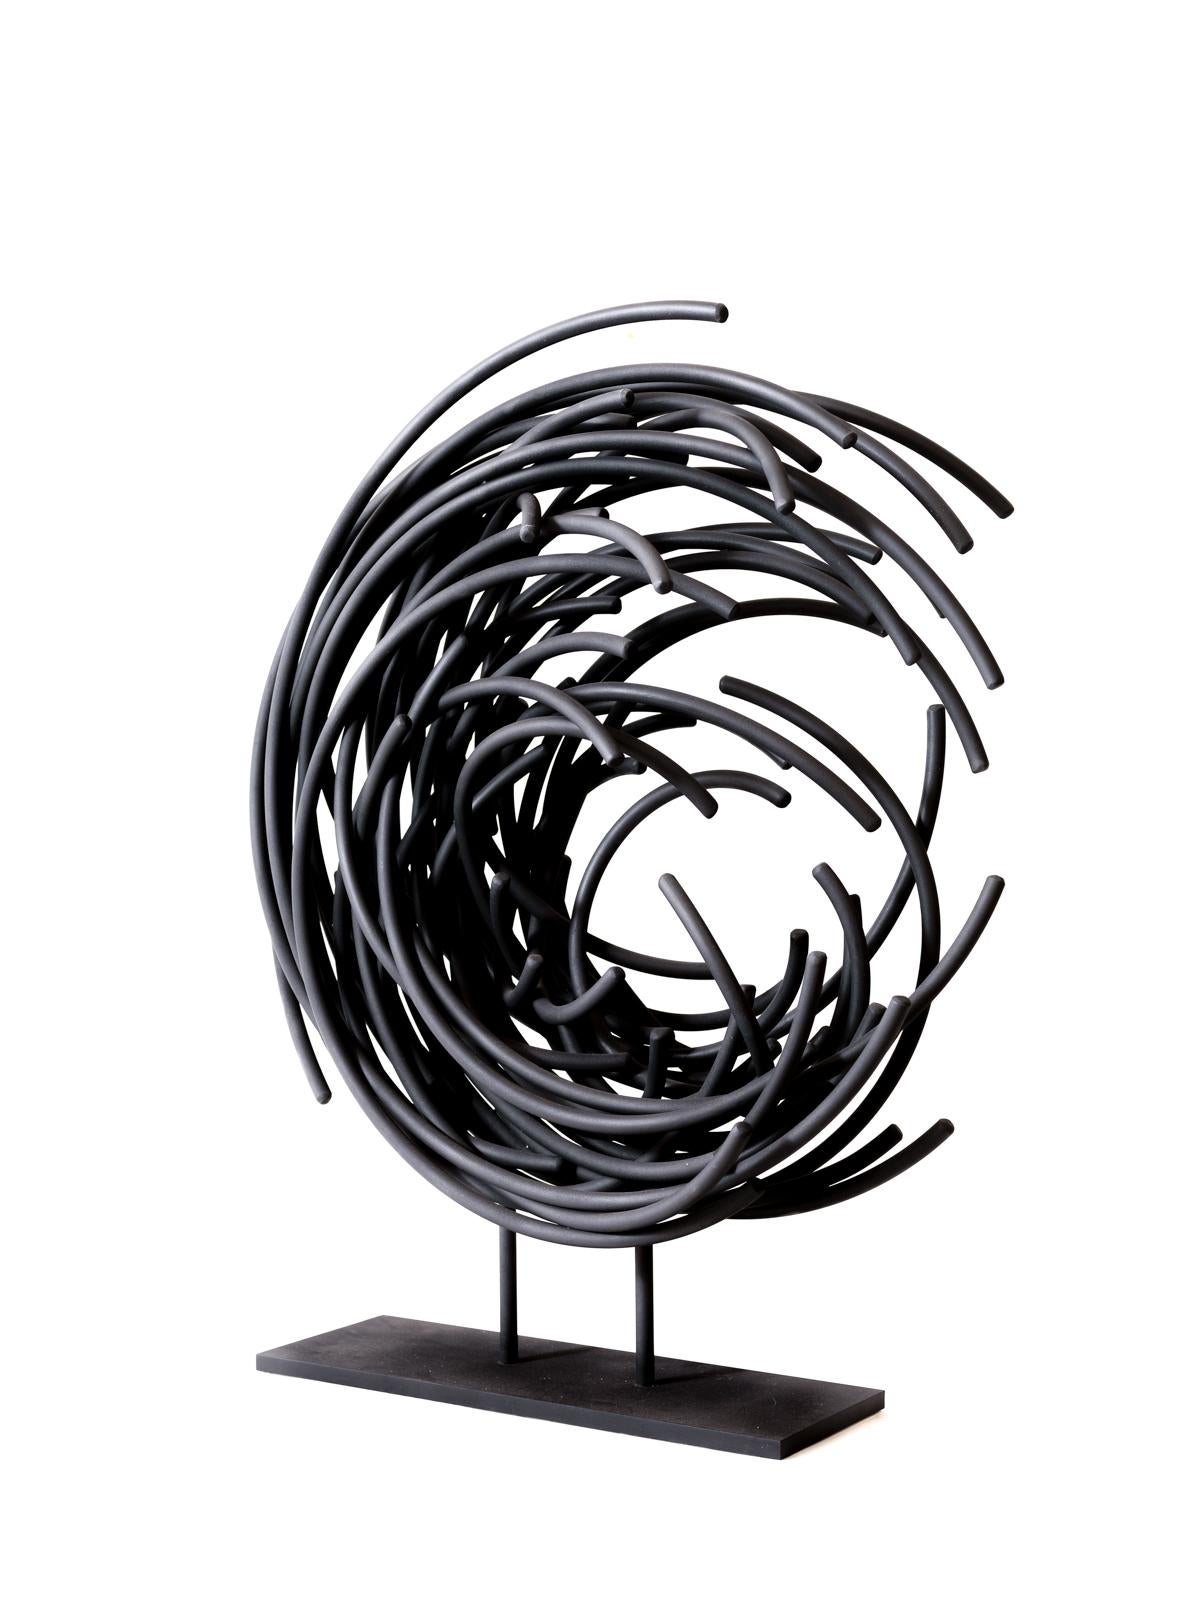 Shayne Dark Abstract Sculpture - Maelstrom Series No 4 - layered, intersecting, forged aluminum sculpture